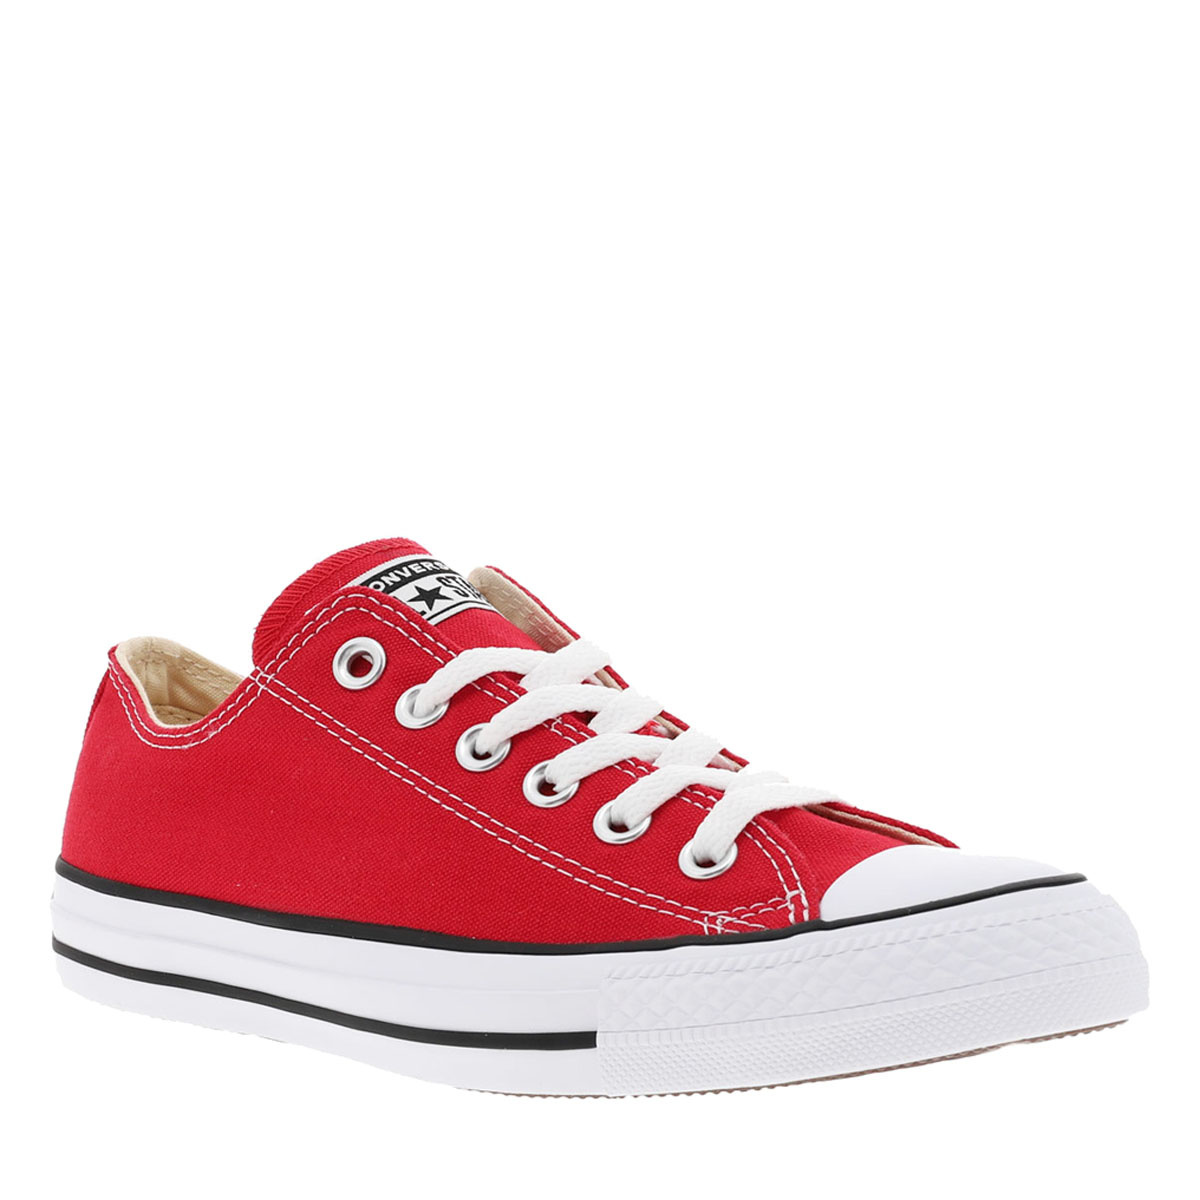 Baskets basses femme Converse CHUCK TAYLOR ALL STAR OX rouge